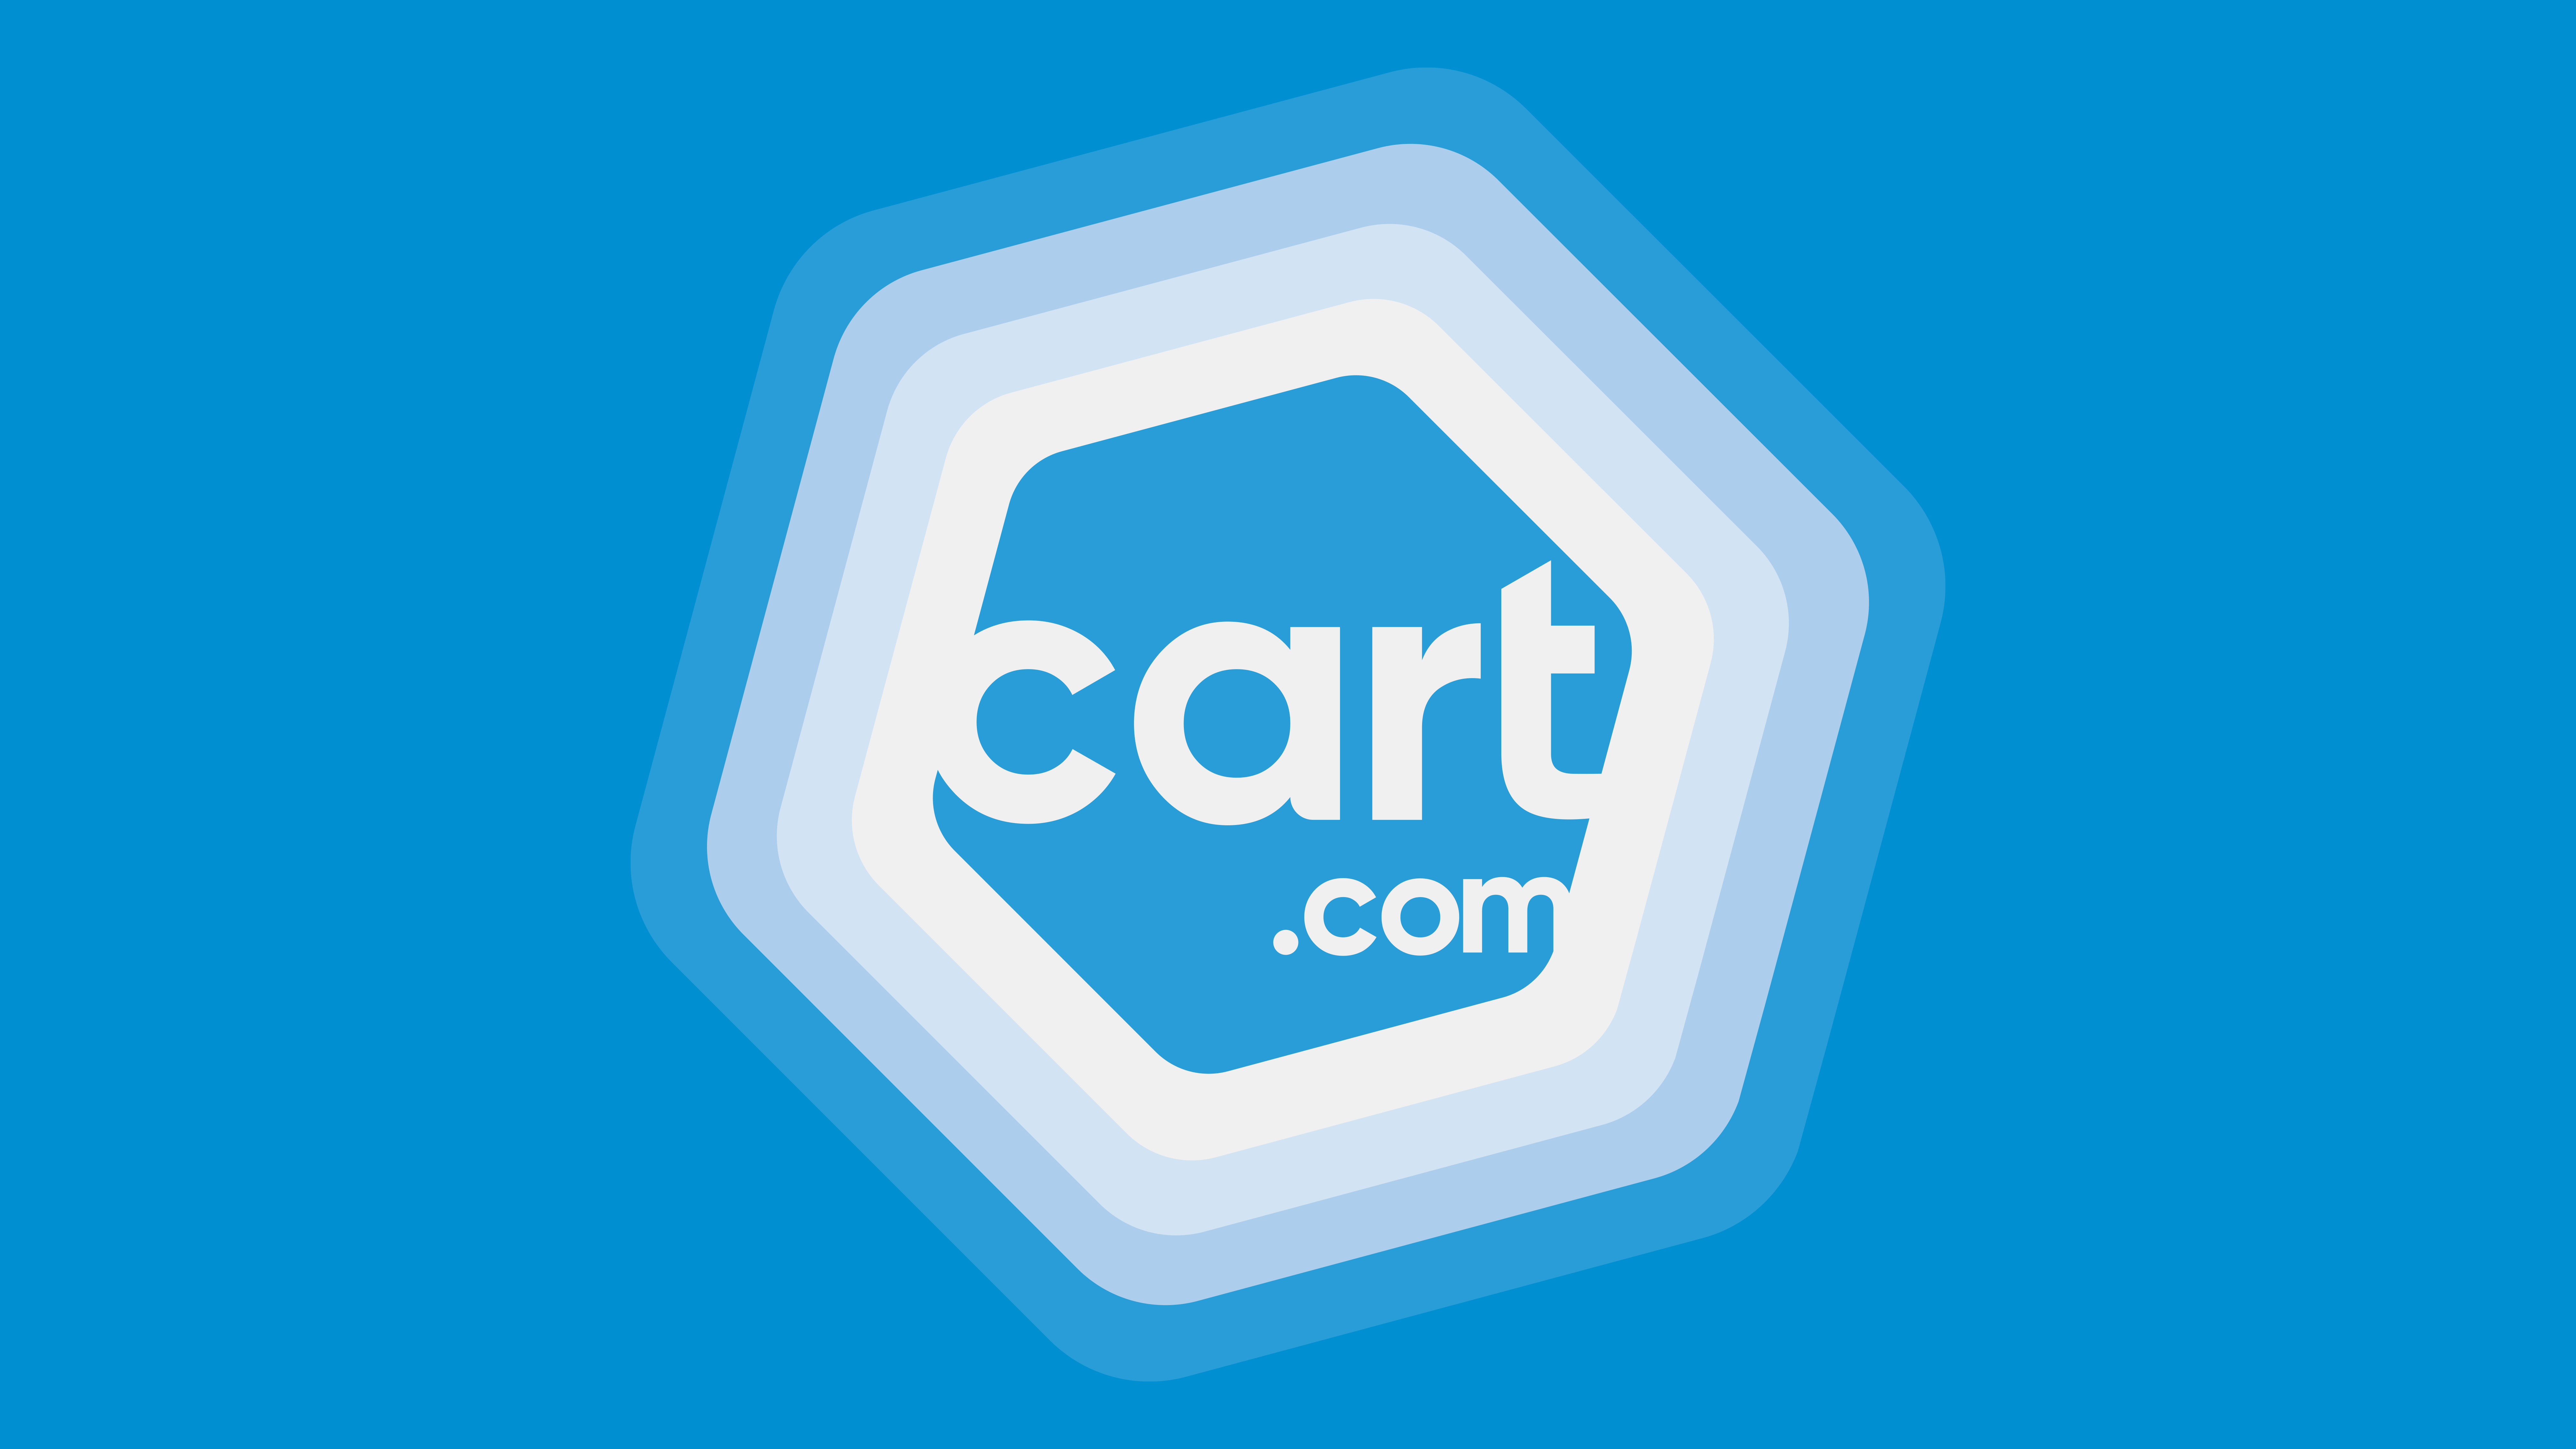 Cart.com Expands Fulfillment Footprint Ahead of Holiday Season to Deliver 2-day Shipping to 95% of US